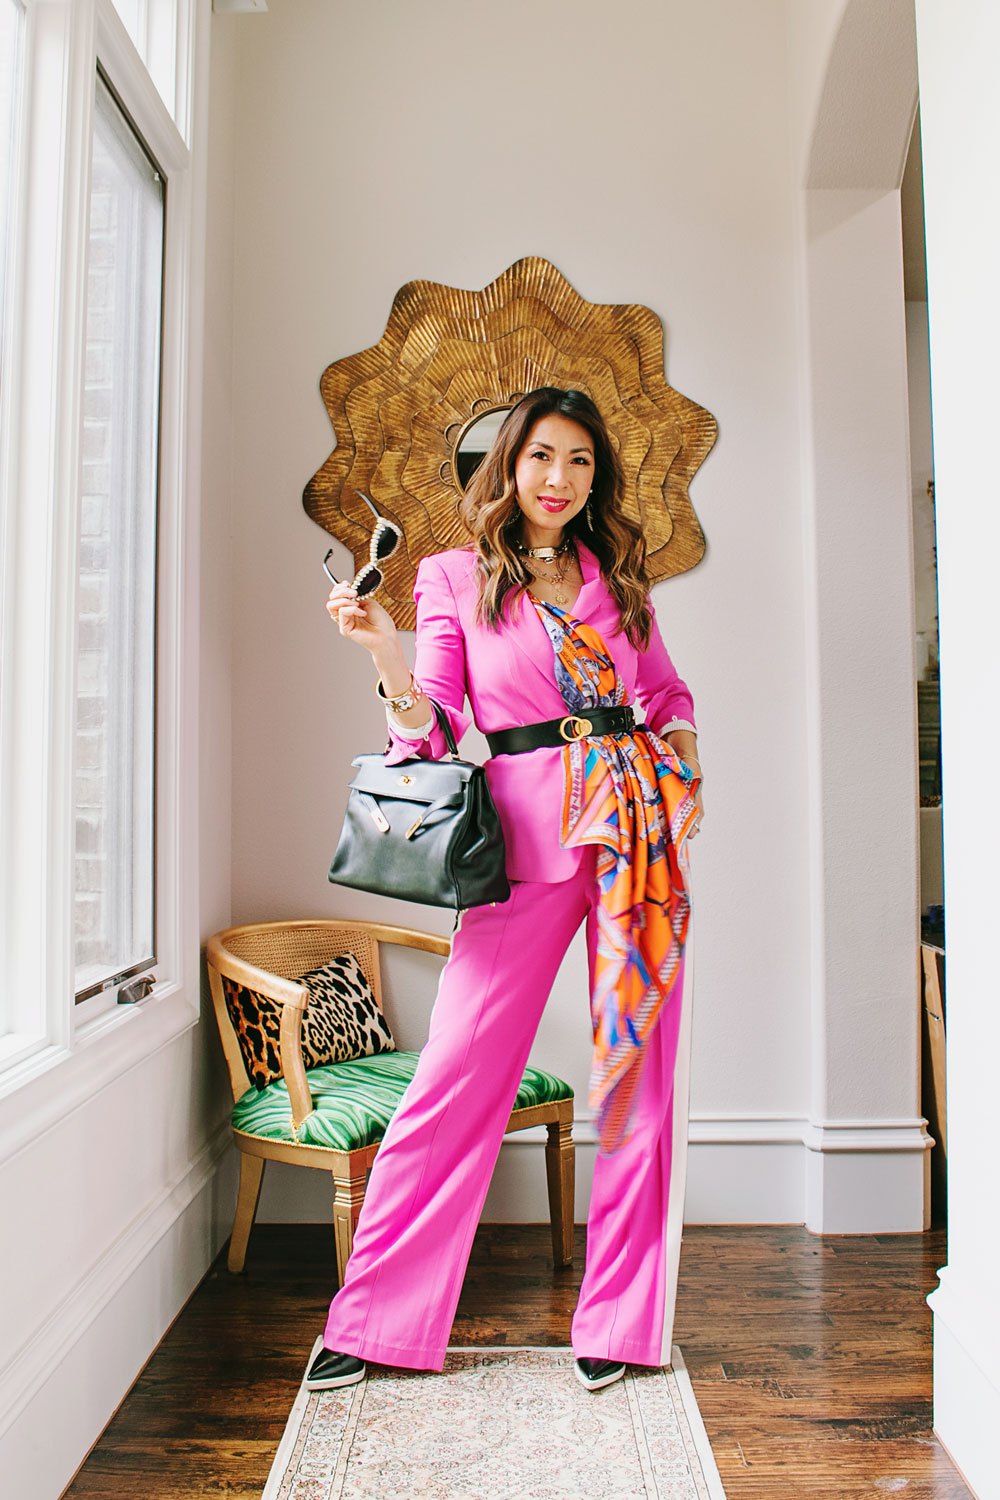 Best Influencers Over 40, Including Samantha Stewart from Style Of Sam